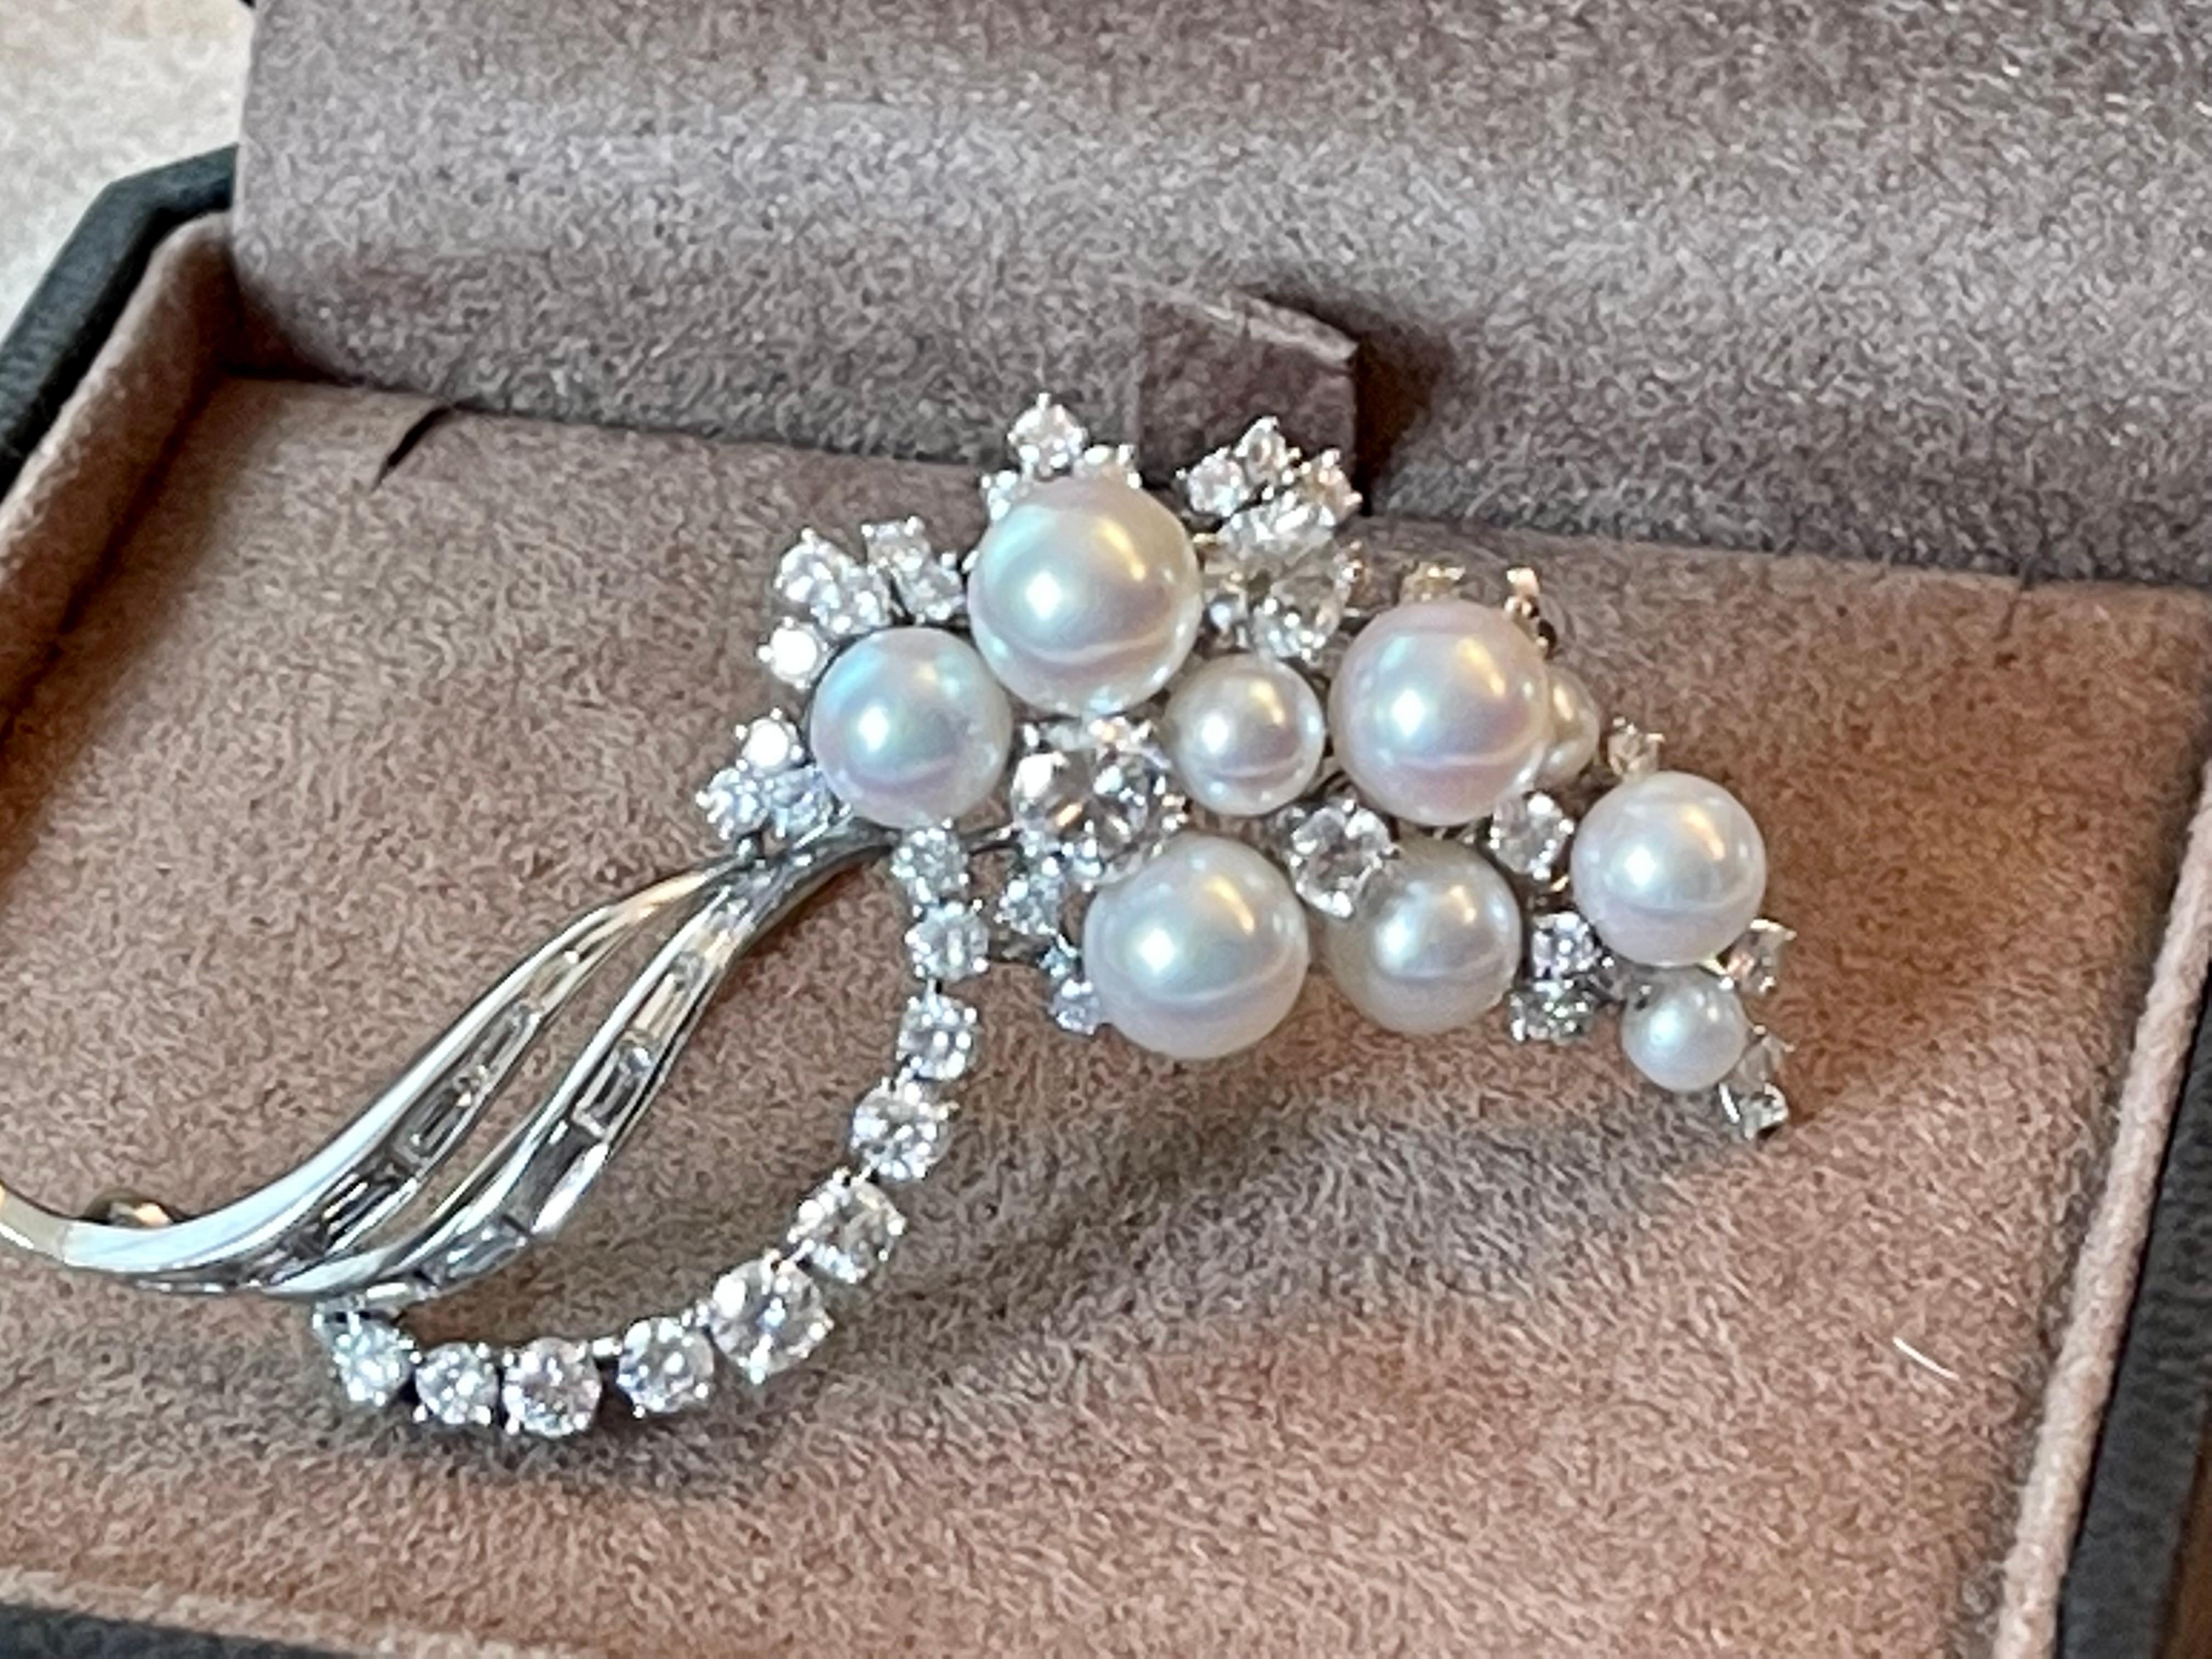 Very elegant 1970s 18 K white Gold brooch set with 7 fine cultured Akoya pearls and 33 brilliant curt Diaonds weighing approximately 1.50 ct and 12 baguette cut Diamonds weighing approximately 0.70 ct. All diamonds G color, vvs clarity. Signed by